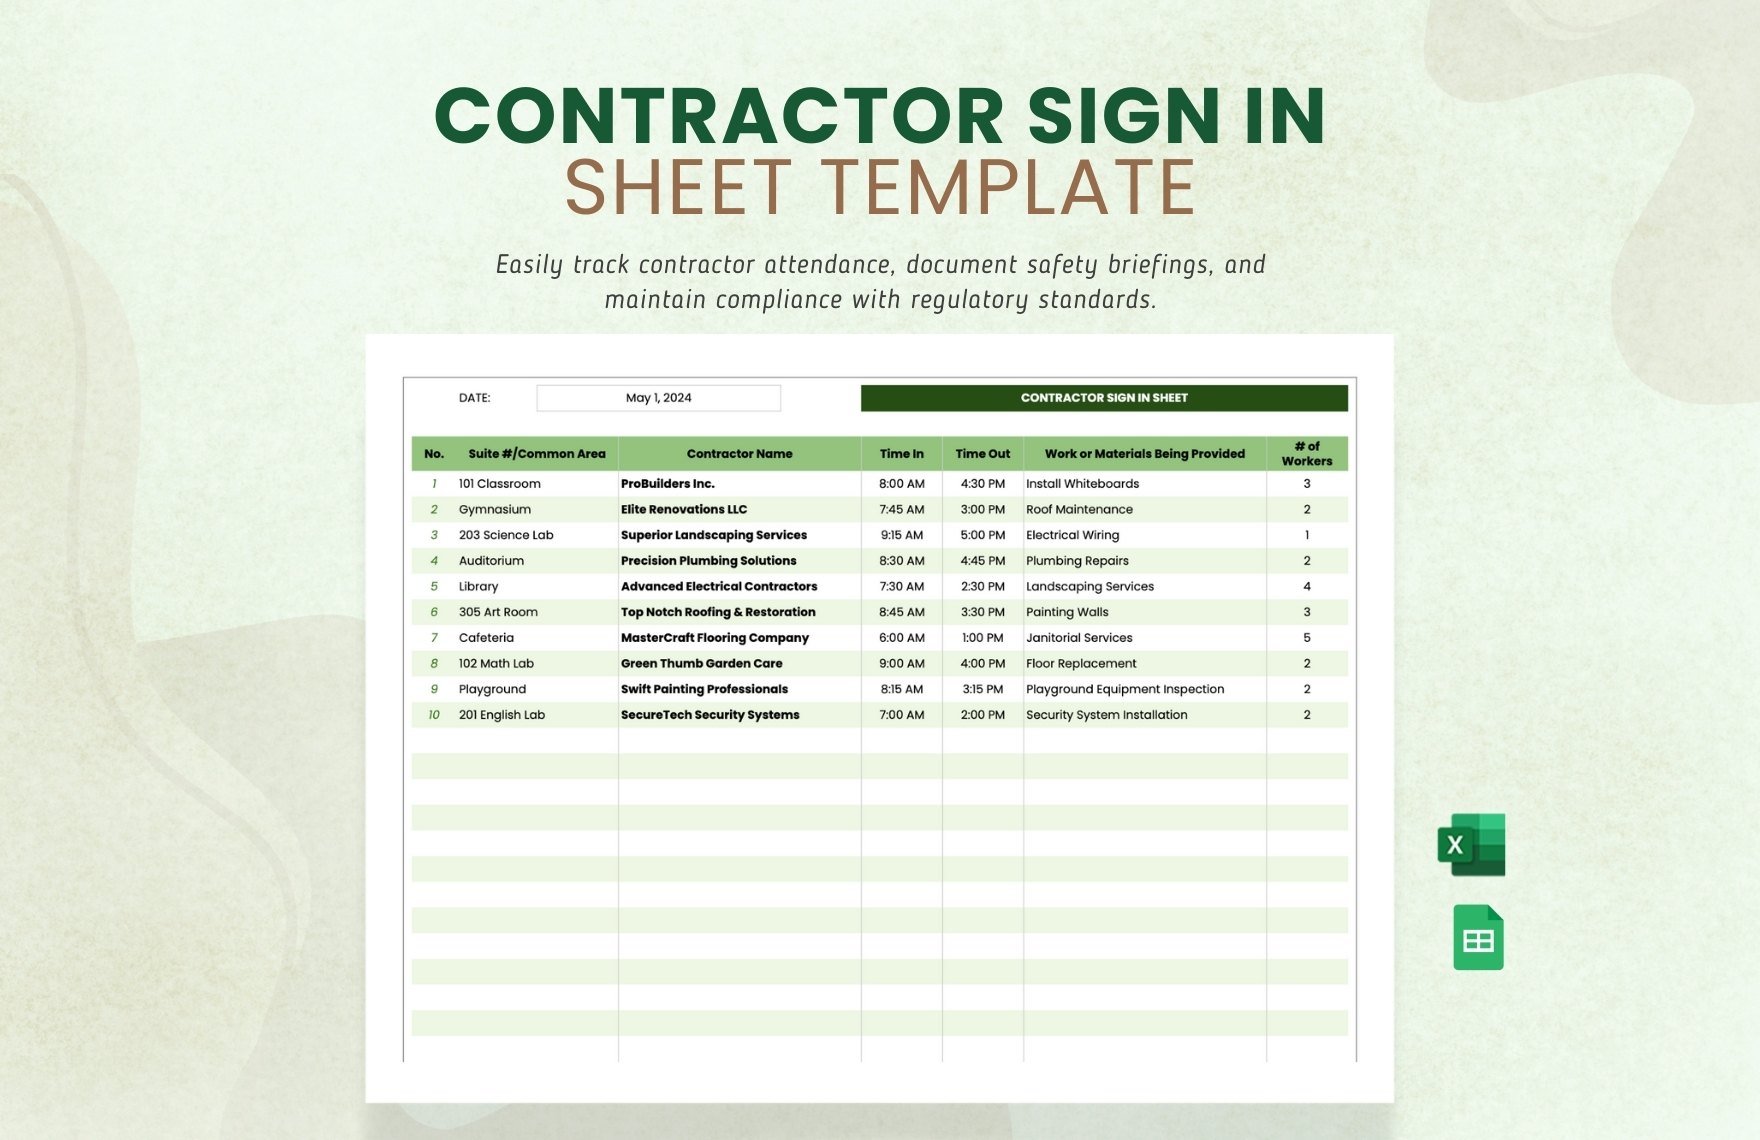 Contractor Sign in Sheet Template in Excel, Google Sheets